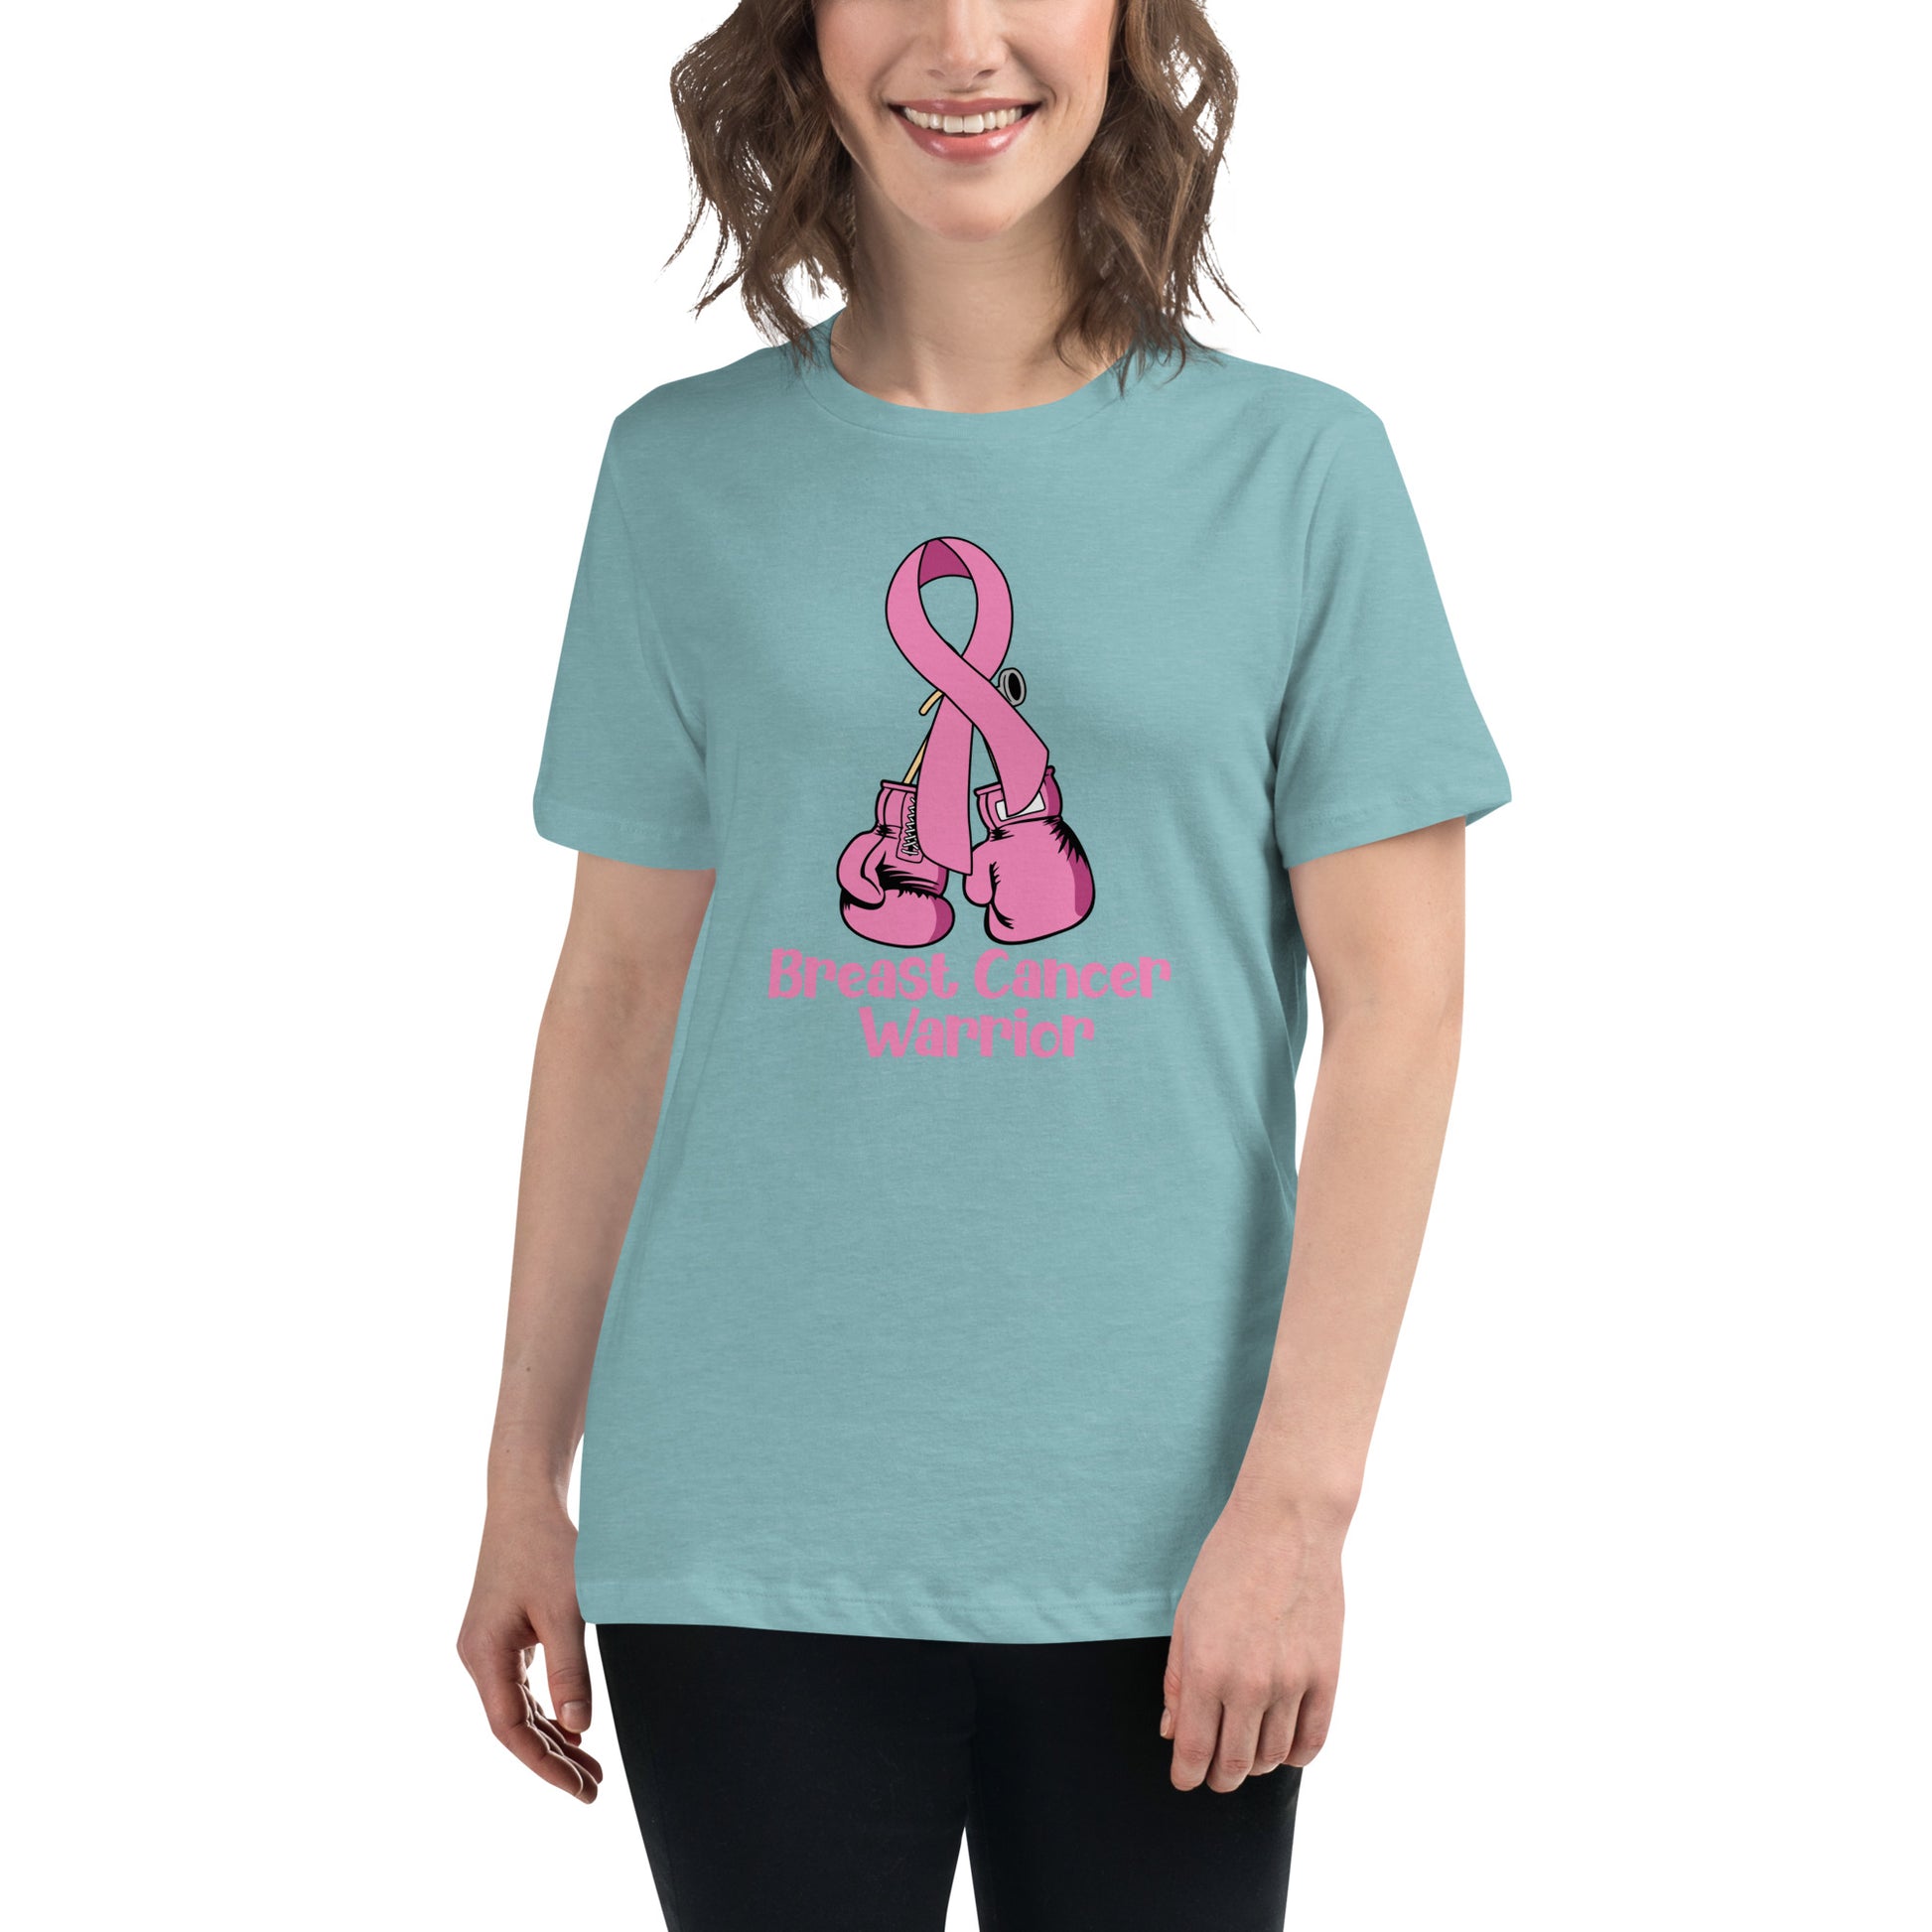 Breast Cancer Warrior Women's Relaxed Tshirt